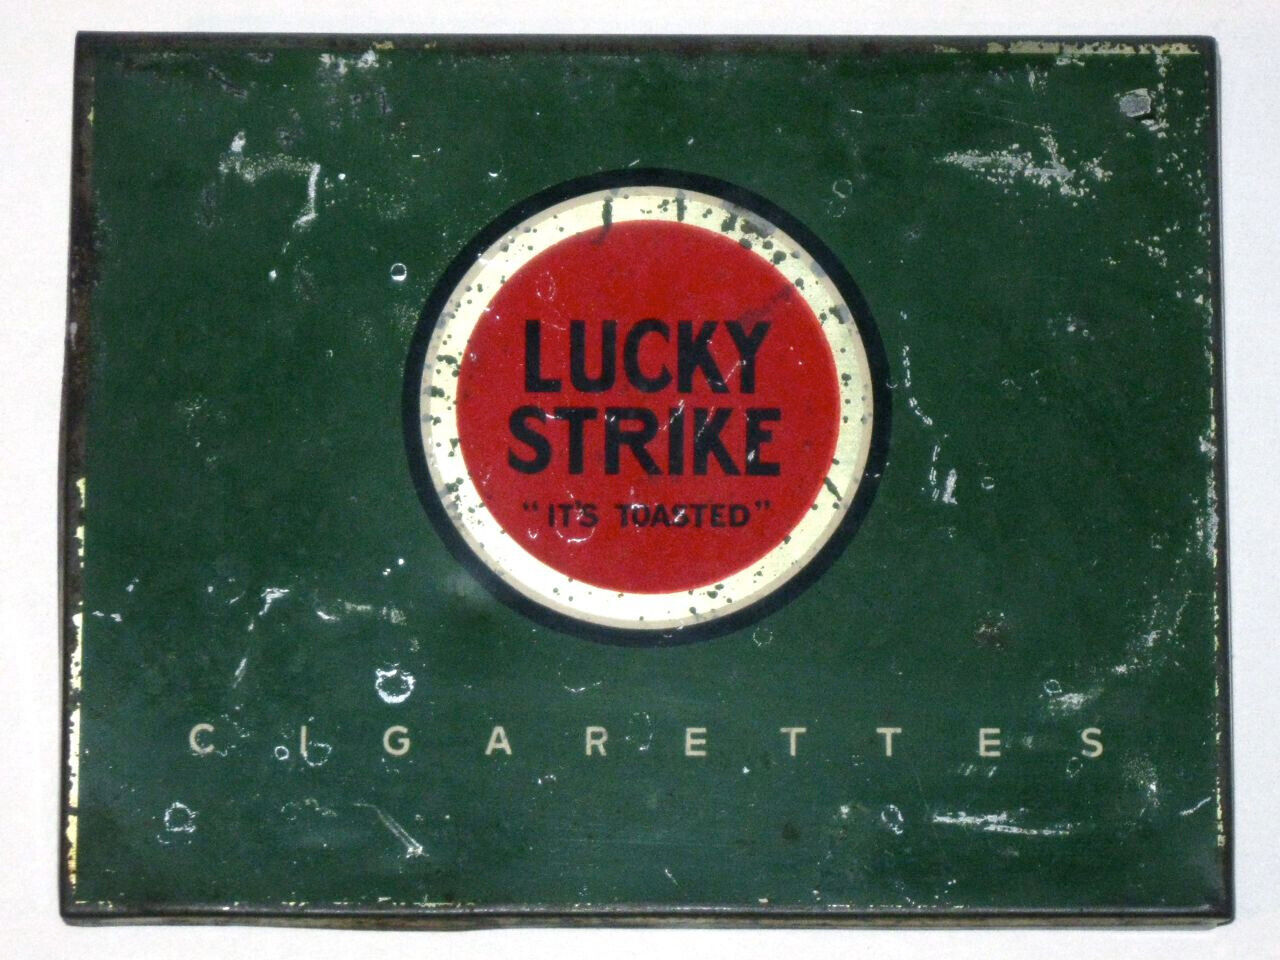 Vintage 1920s-1930s LUCKY STRIKE Cigarettes Hinged IT'S TOASTED Advertising Tin